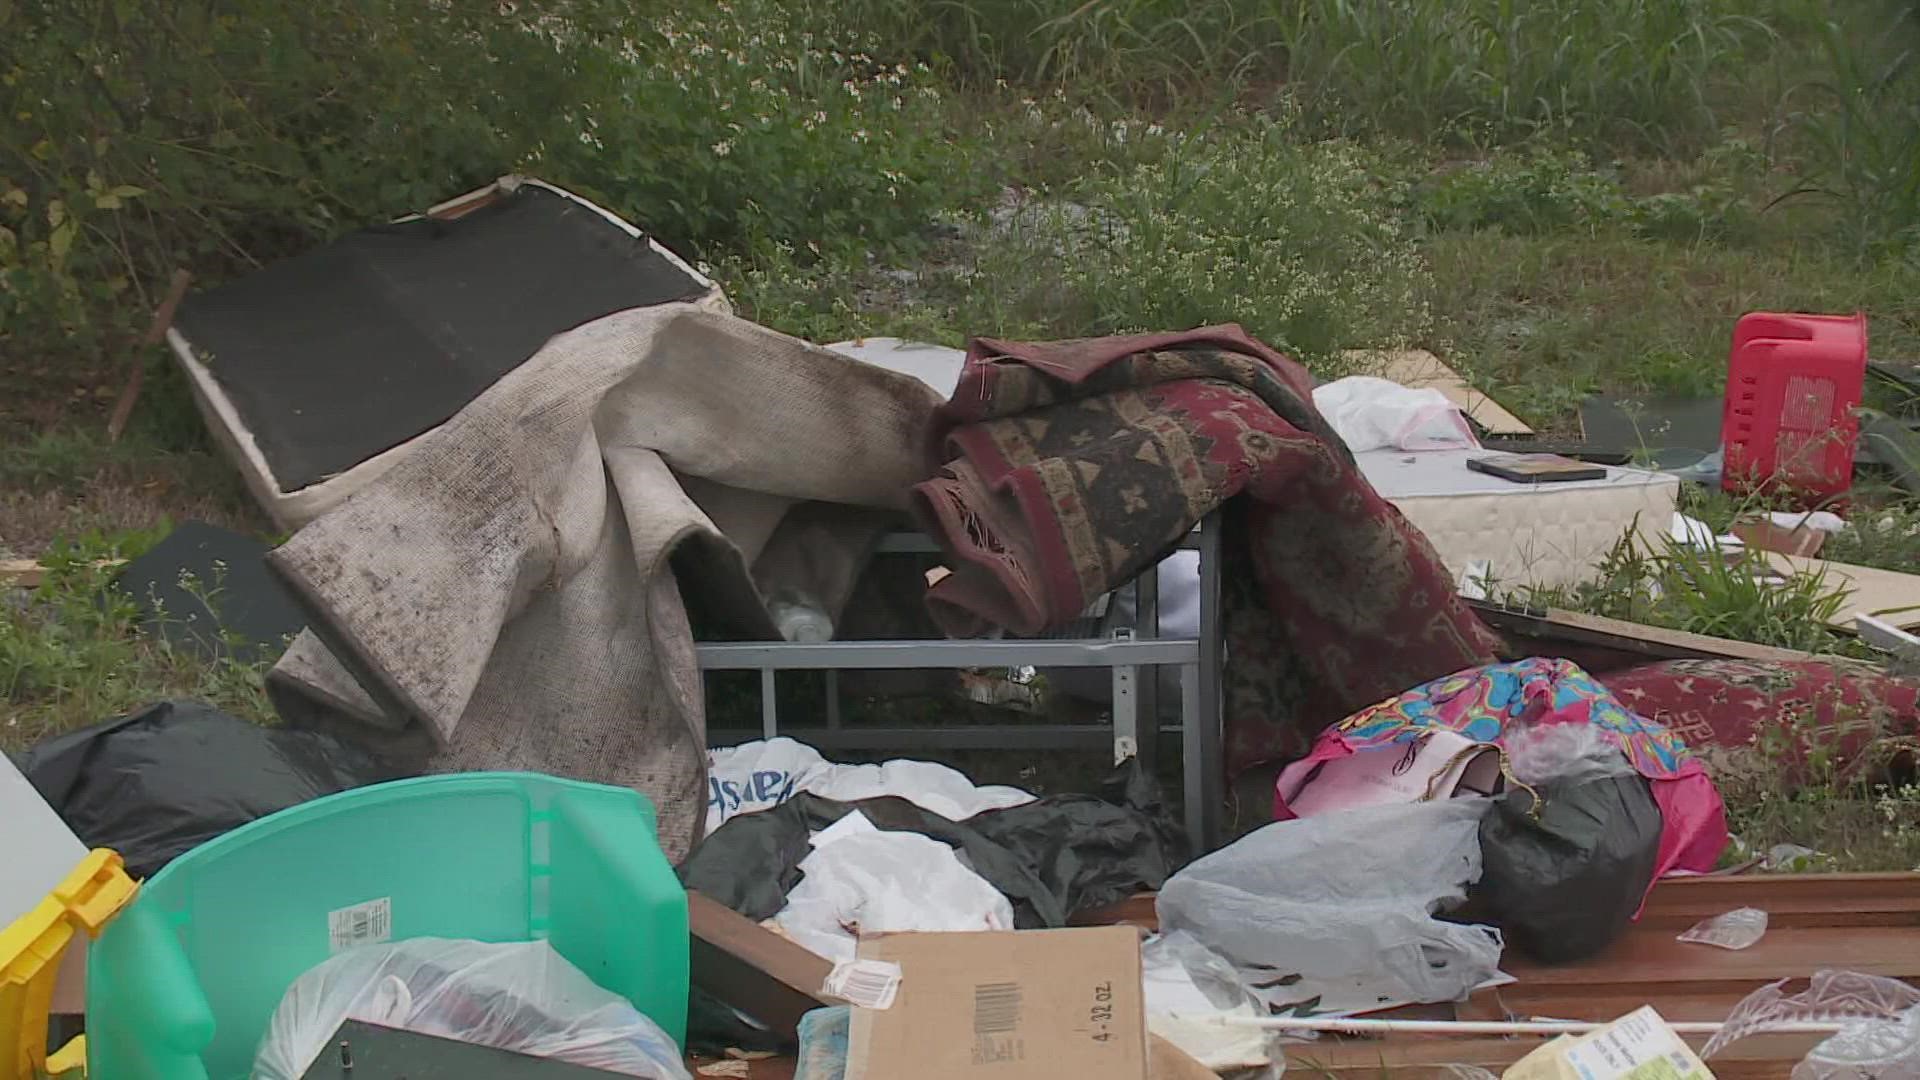 One resident says as soon as the city clears away garbage, more trash is dumped.